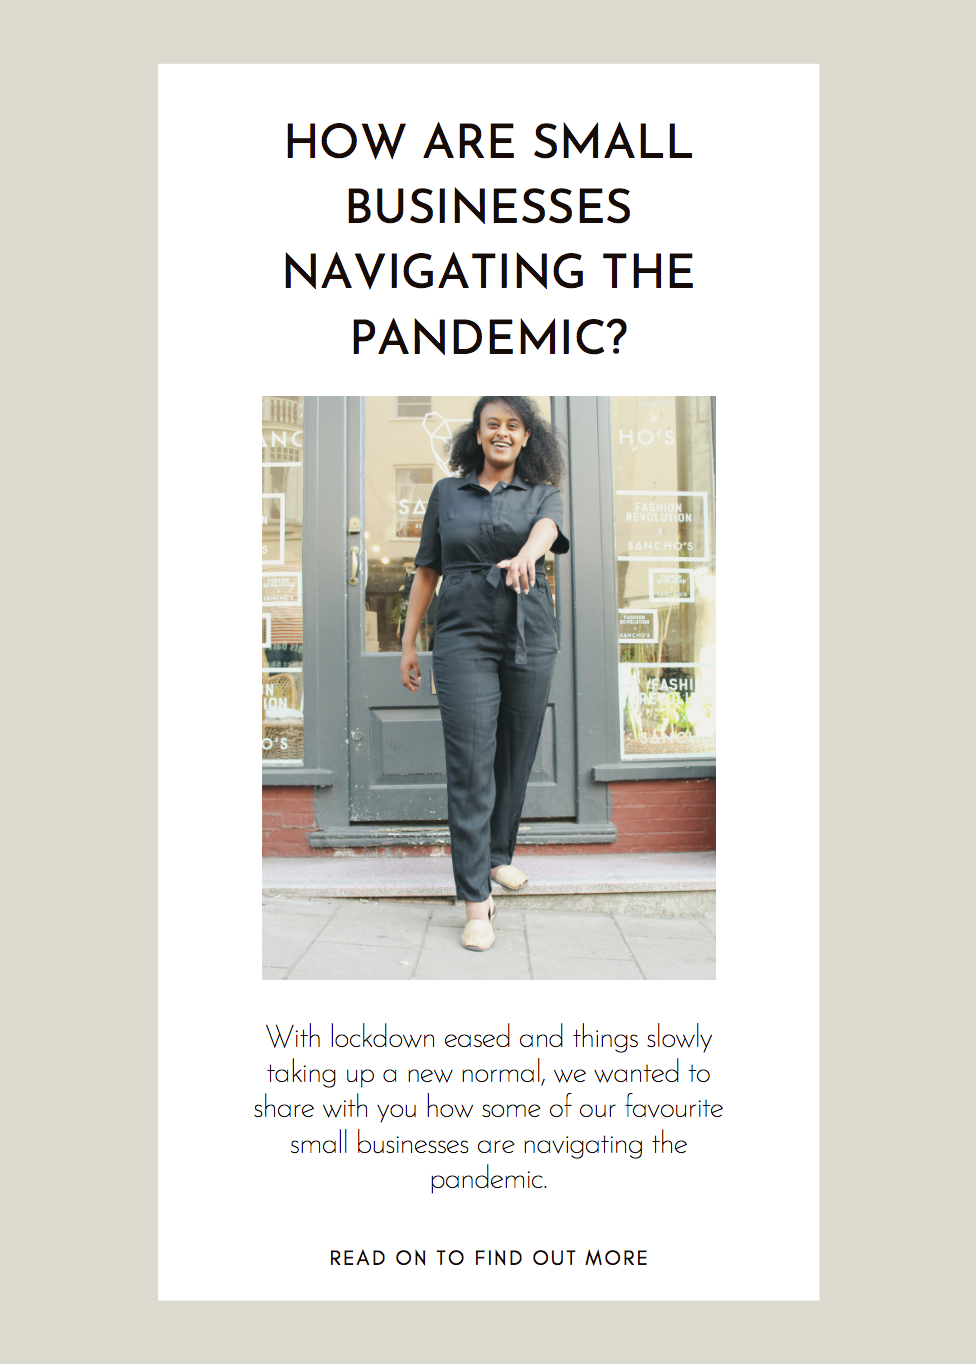 How are Small Businesses Navigating the Pandemic?